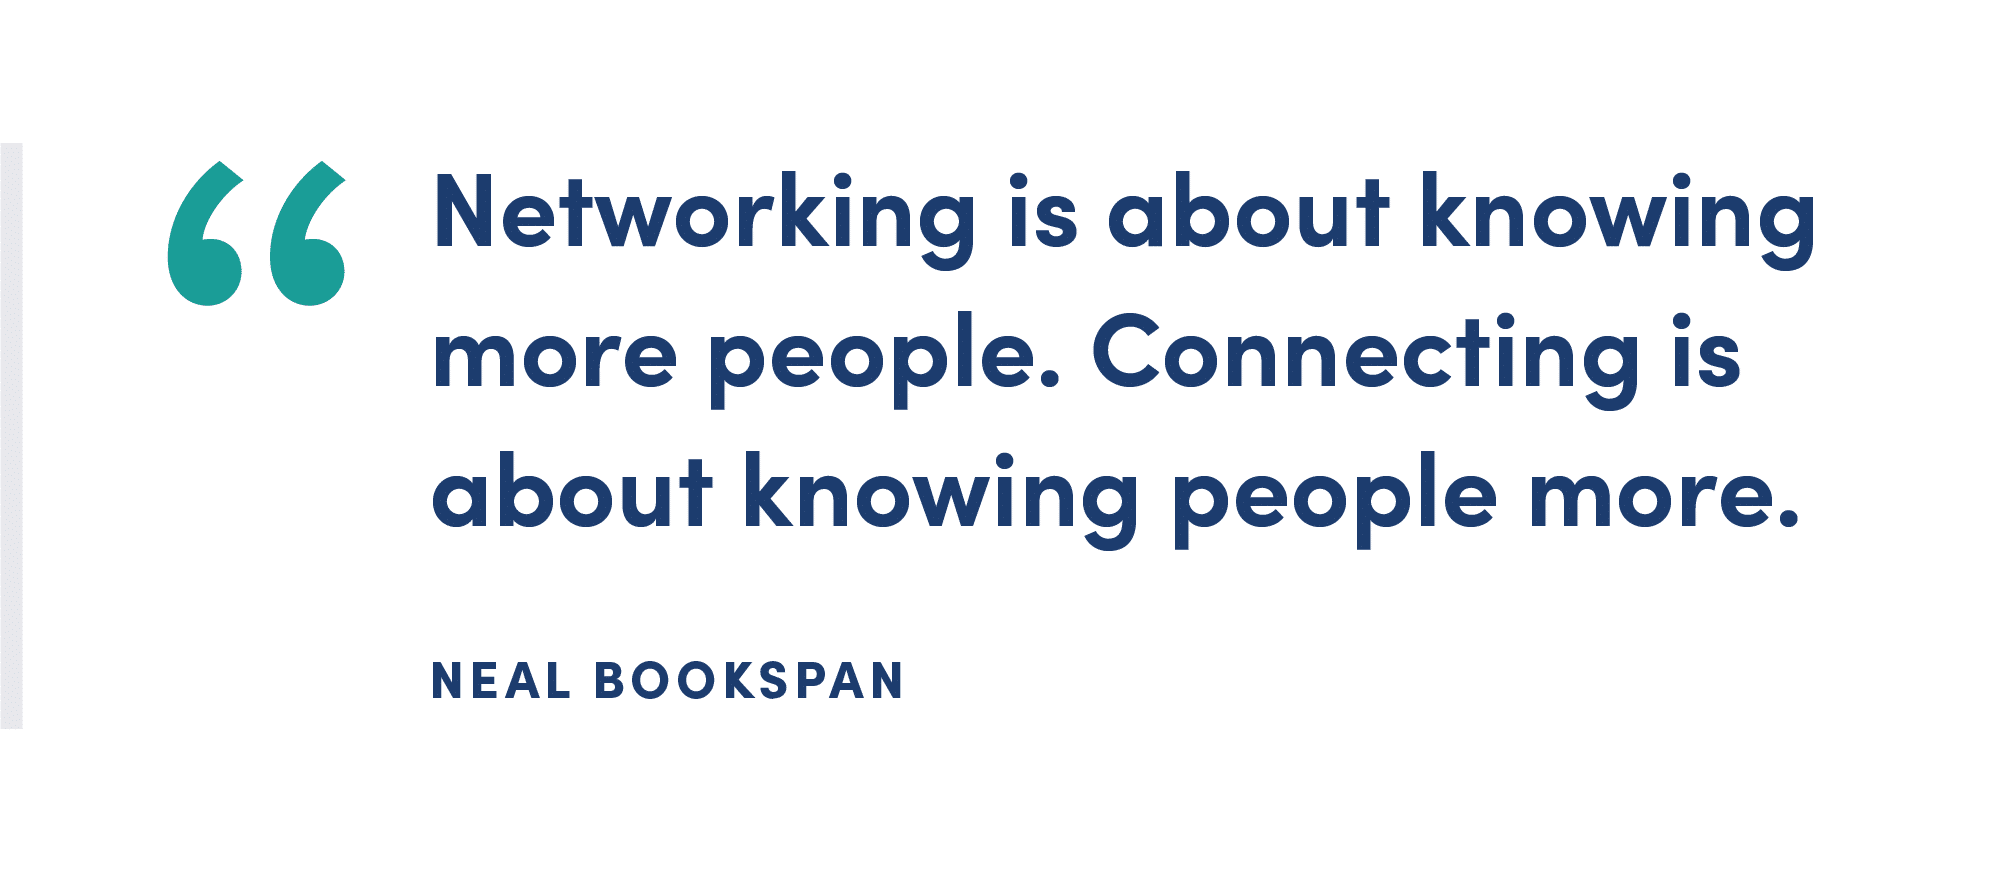 Networking is about knowing more people.